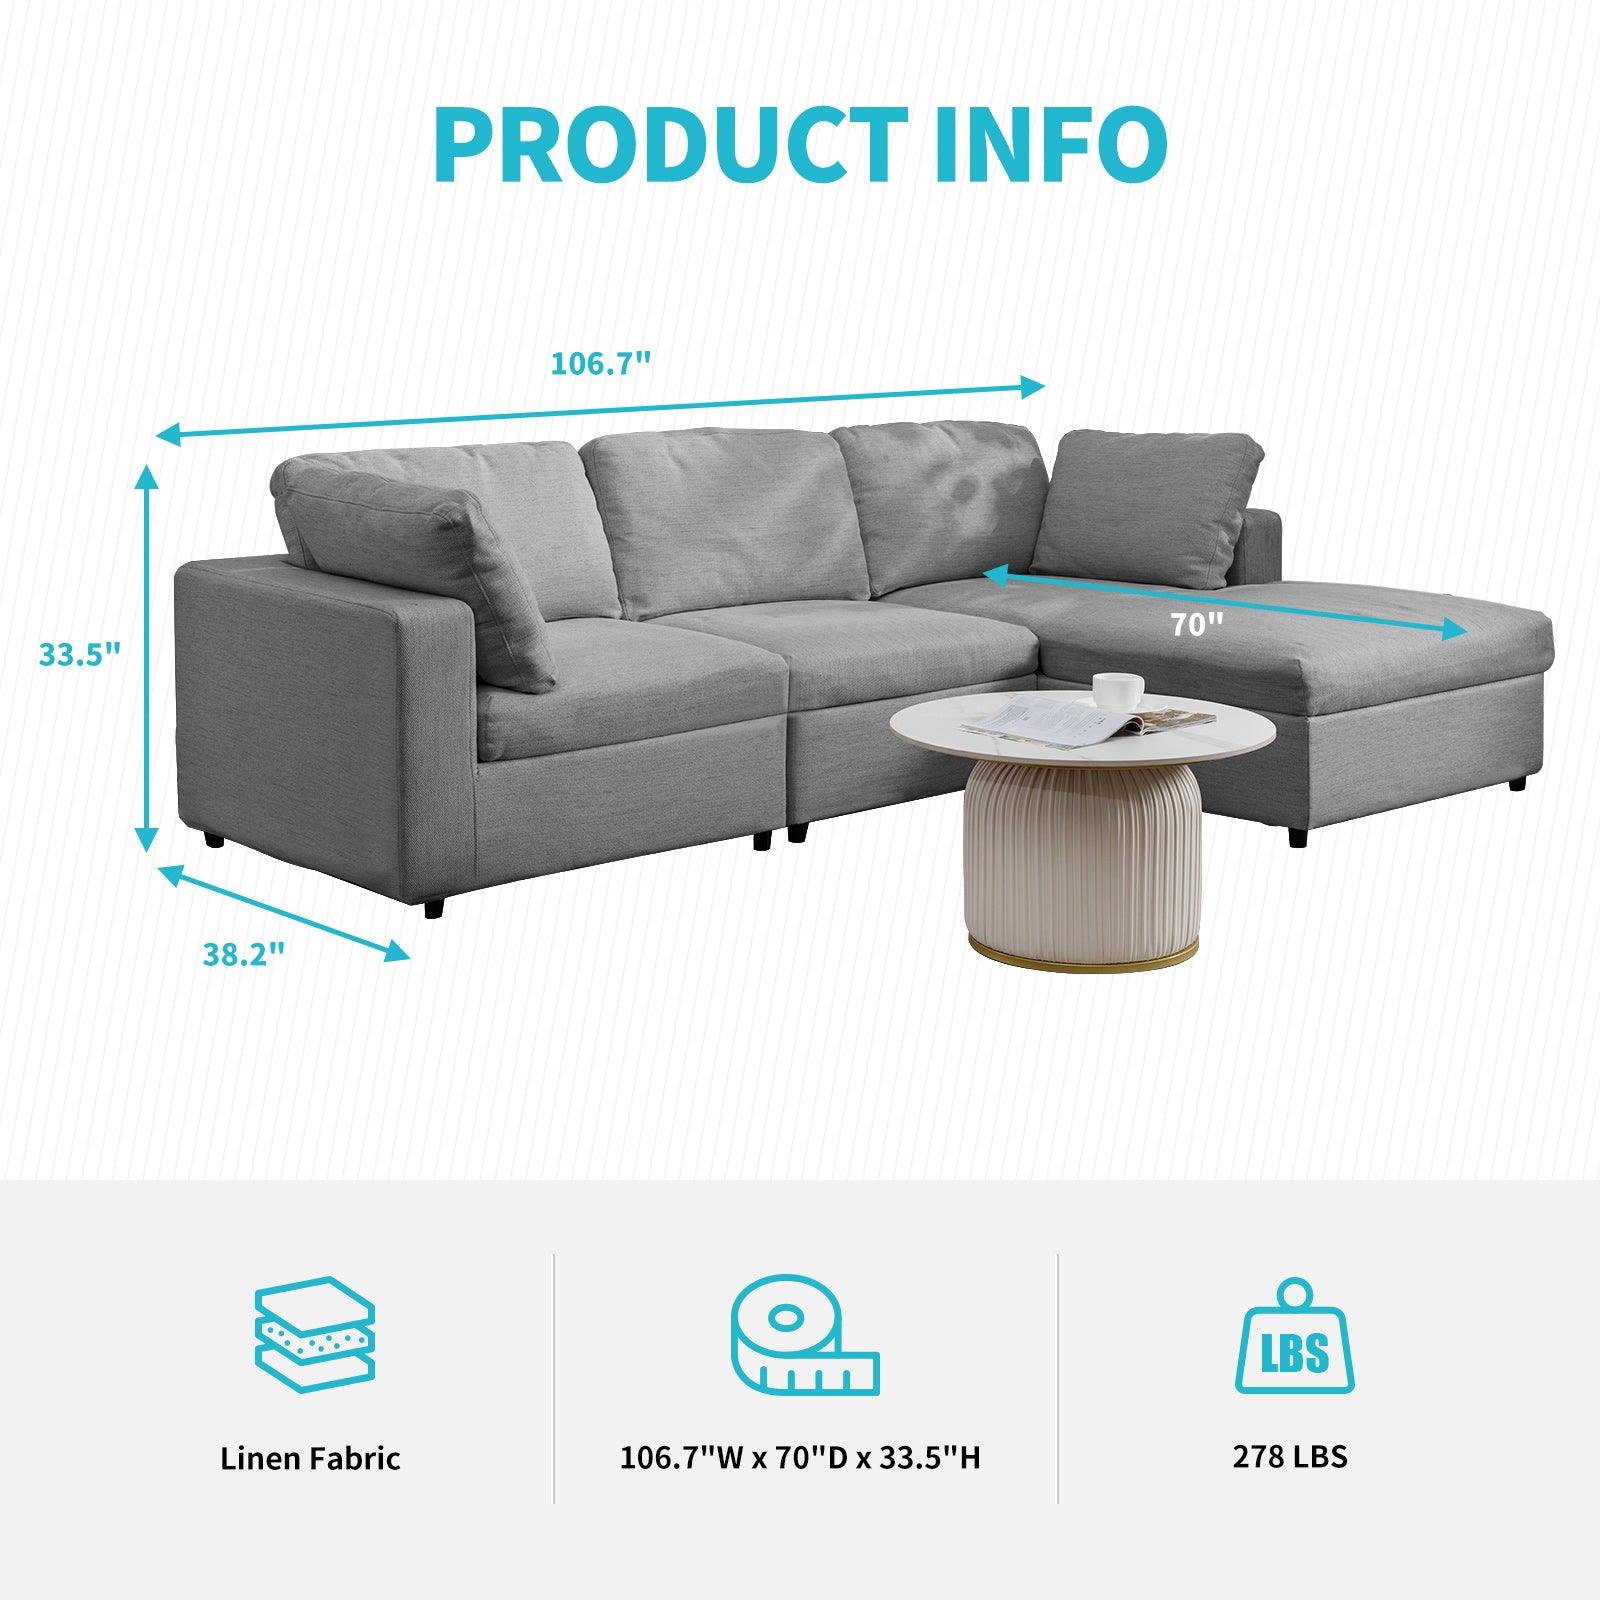 Cecer 107" Right Chaise L Shaped Sectional Sofa with 2 Free Cushions, Extra Large Sofa Couch with Linen Fabric & 6" High Resilience Foam for Living Room